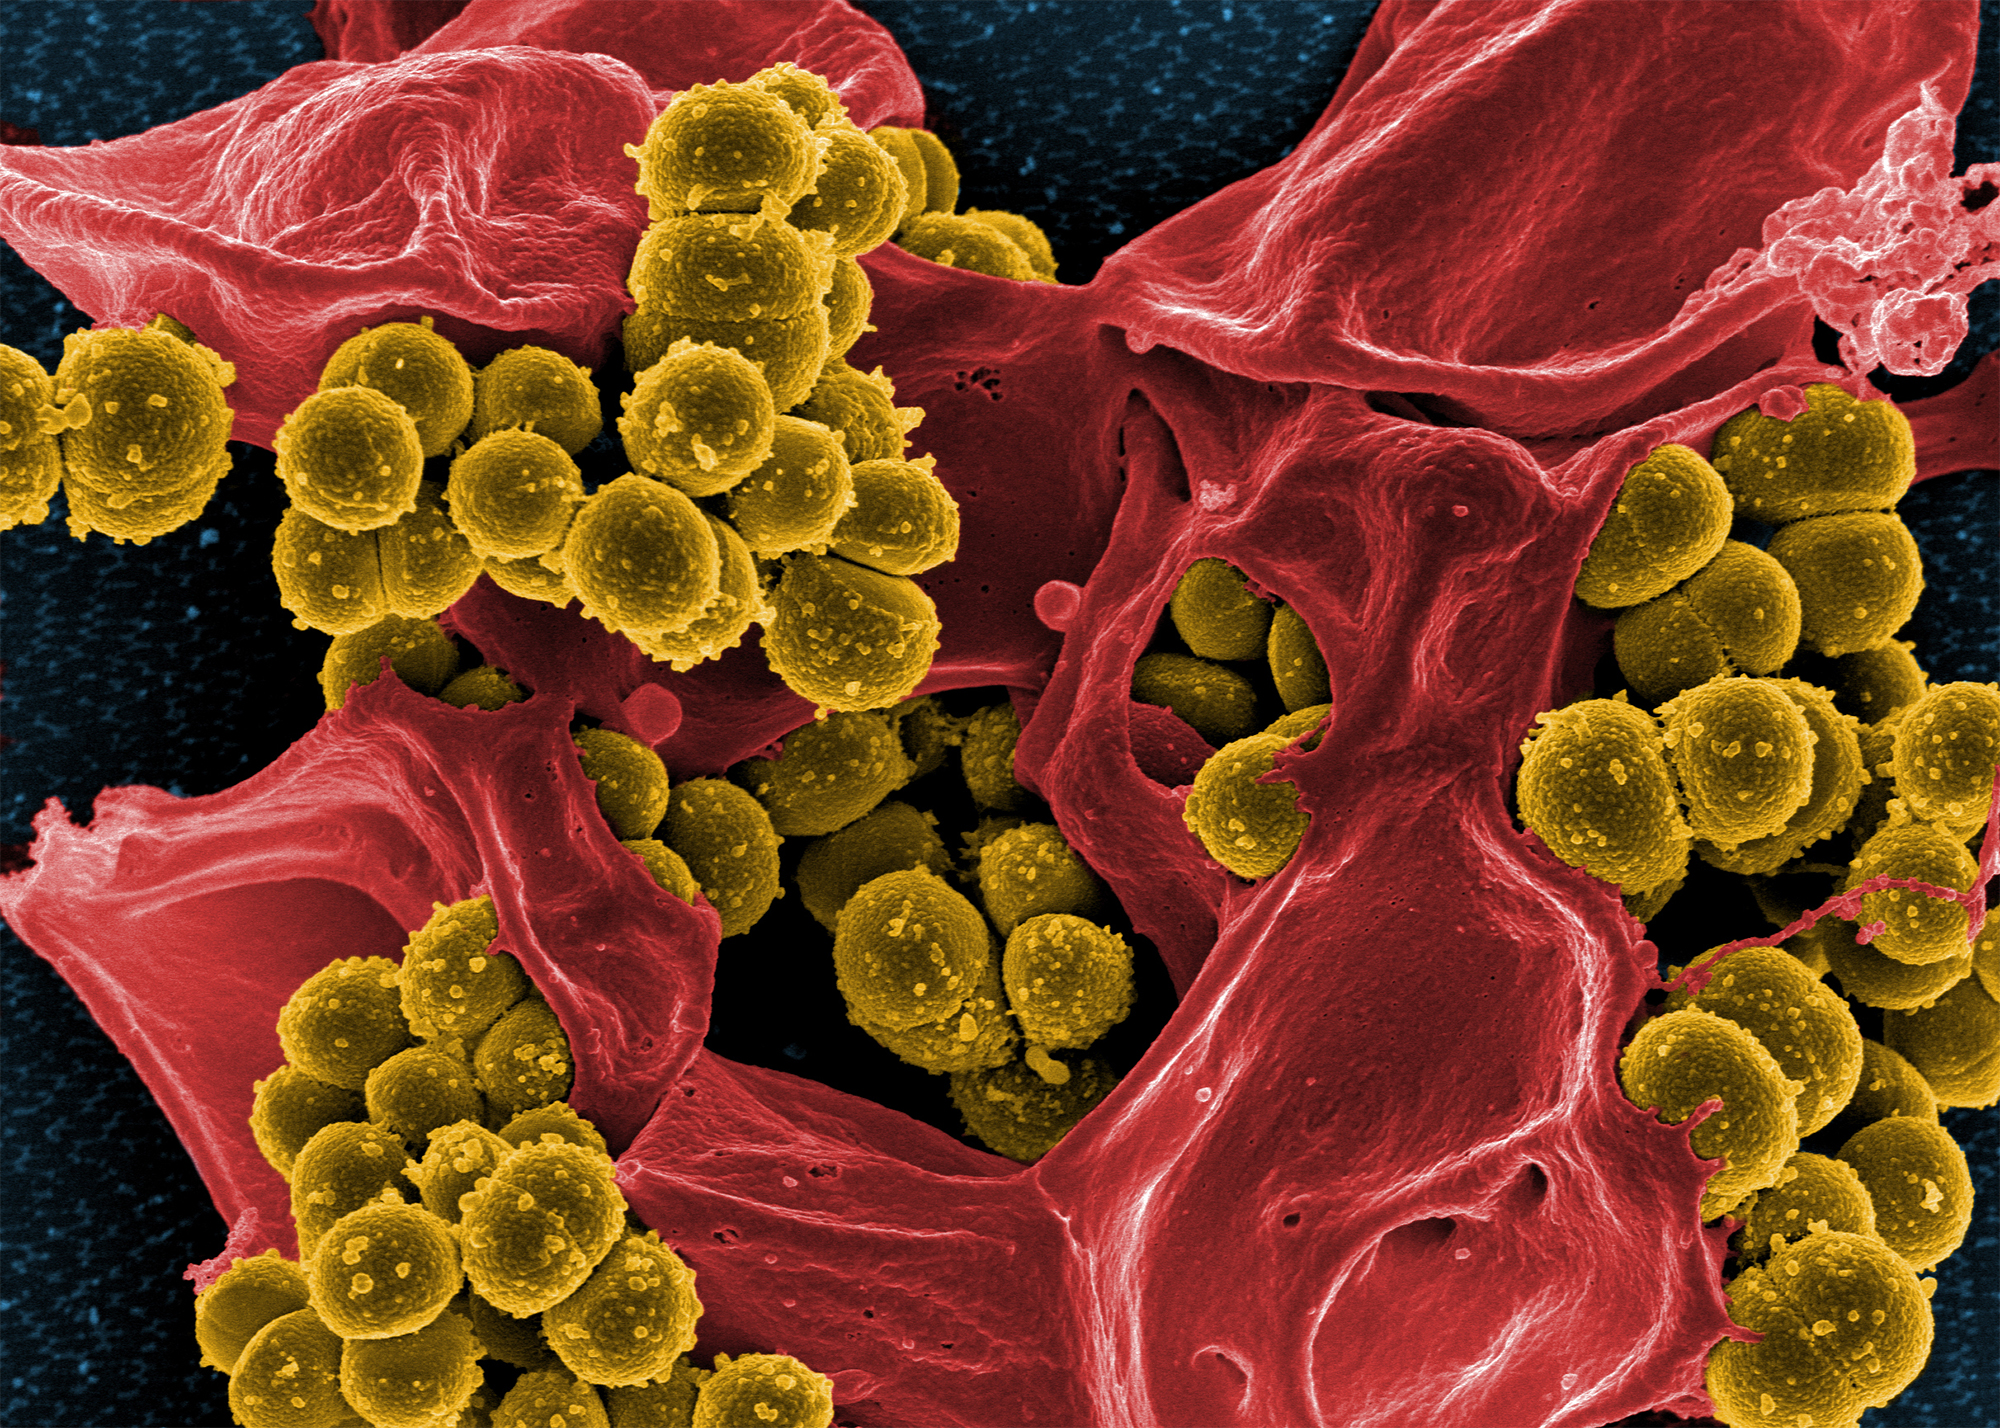 Extremely tough bacteria's resistance under the microscope